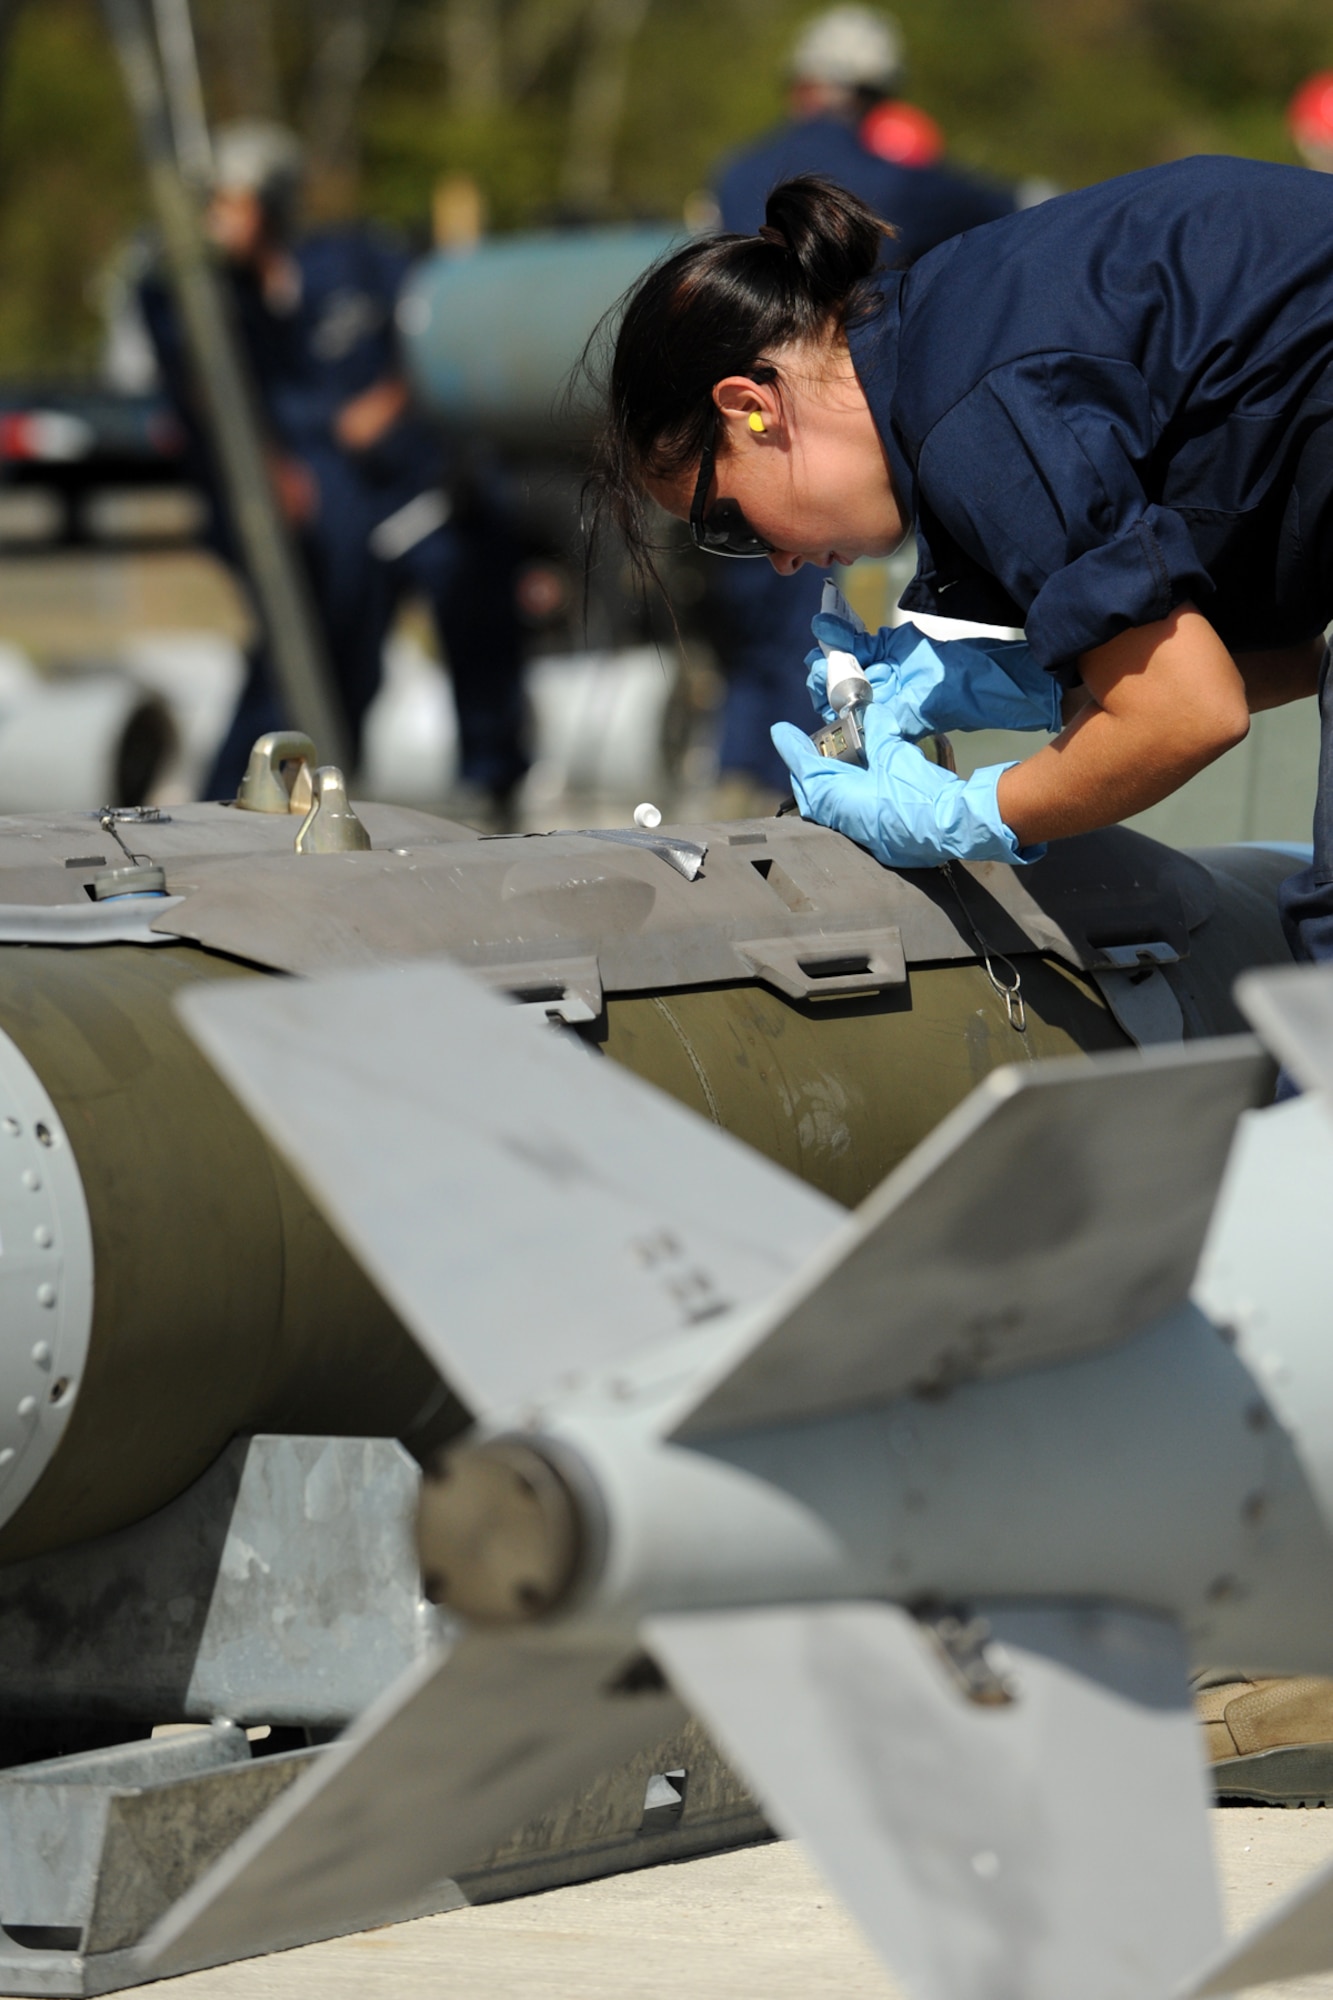 U.S. Air Force Airman 1st Class Teresa Procell, 307th Maintenance Squadron munitions technician, puts the final touches on the assembly of a simulated 2000-pound Joint Direct Attack Munition during the bomb-build evaluation for the 2nd annual Global Strike Challenge competition at Barksdale Air Force Base, La., Oct. 5, 2011. The Global Strike Challenge is the world's premier bomber, Intercontinental Ballistic Missile and security forces competition with units from the Air Force Global Strike Command, Air Combat Command, Air Force Reserve Command and the Air National Guard, and the official score-posting will be at Barksdale, Nov 8-9. (U.S. Air Force photo by Master Sgt. Greg Steele/Released)